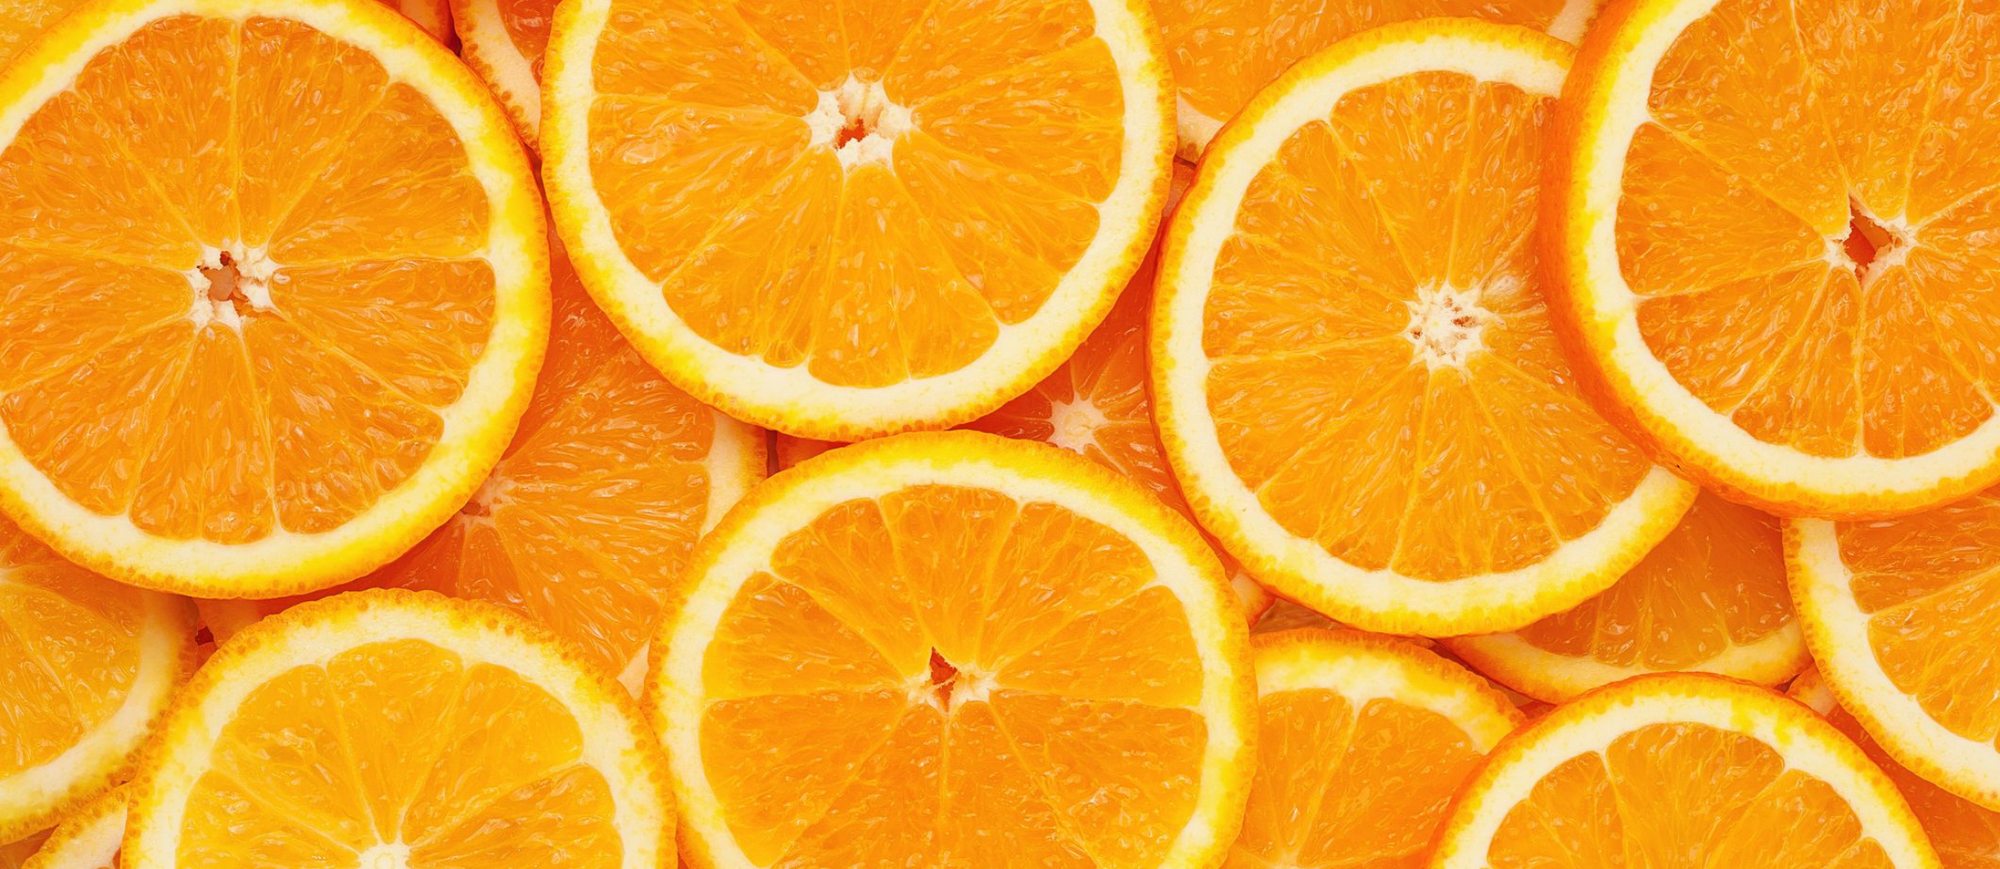 What are the real benefits of Vitamin C?